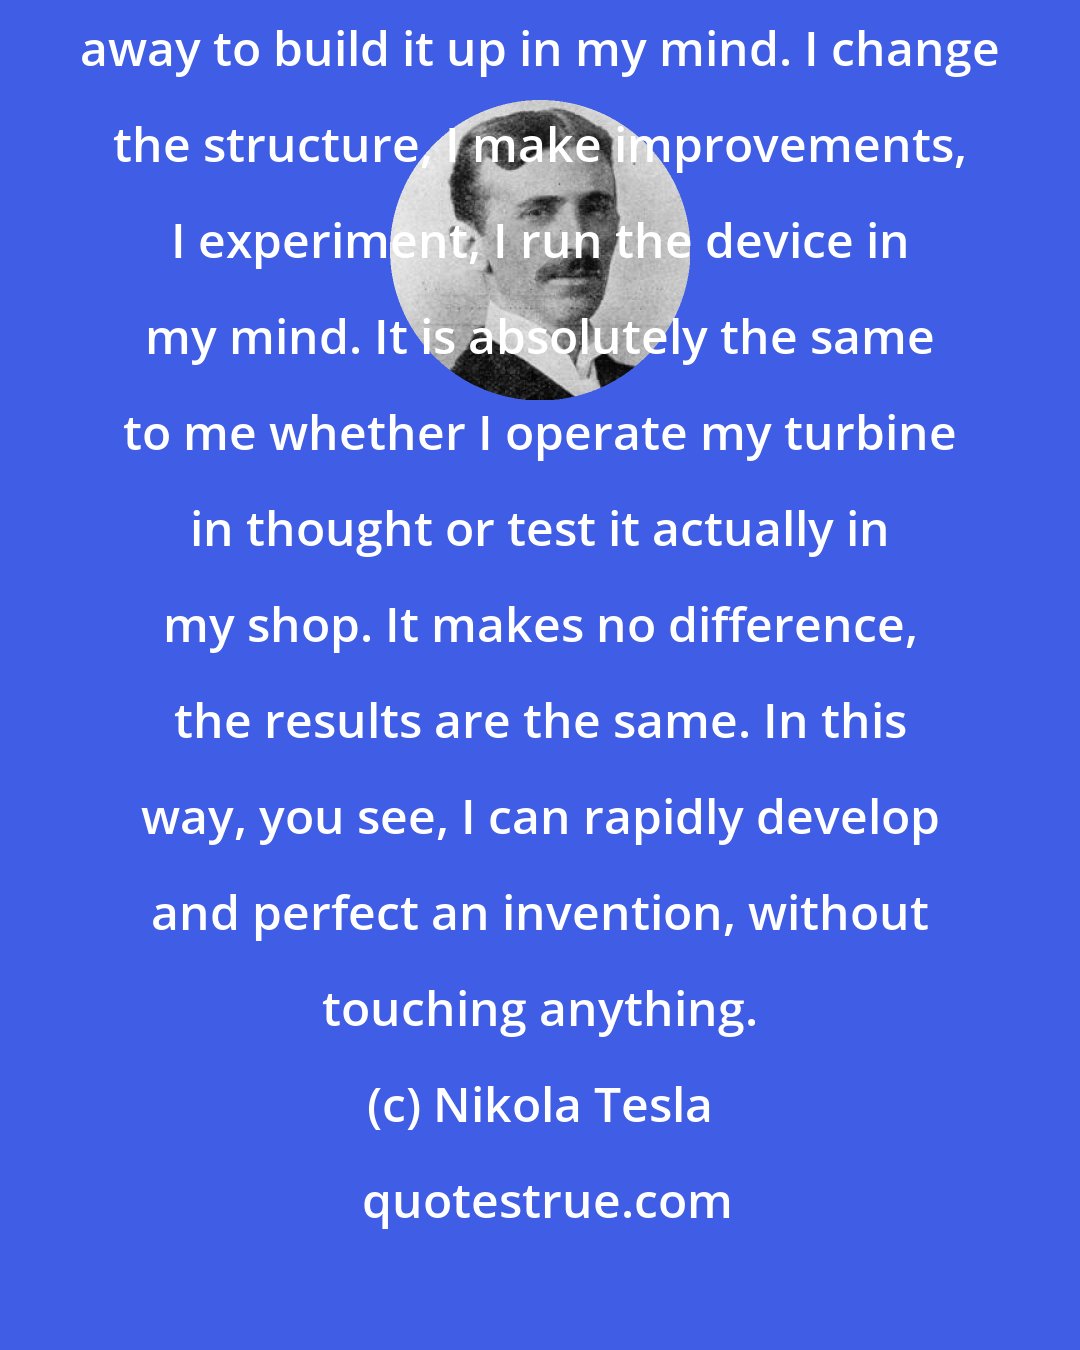 Nikola Tesla: I do not rush into constructive work. When I get an idea, I start right away to build it up in my mind. I change the structure, I make improvements, I experiment, I run the device in my mind. It is absolutely the same to me whether I operate my turbine in thought or test it actually in my shop. It makes no difference, the results are the same. In this way, you see, I can rapidly develop and perfect an invention, without touching anything.